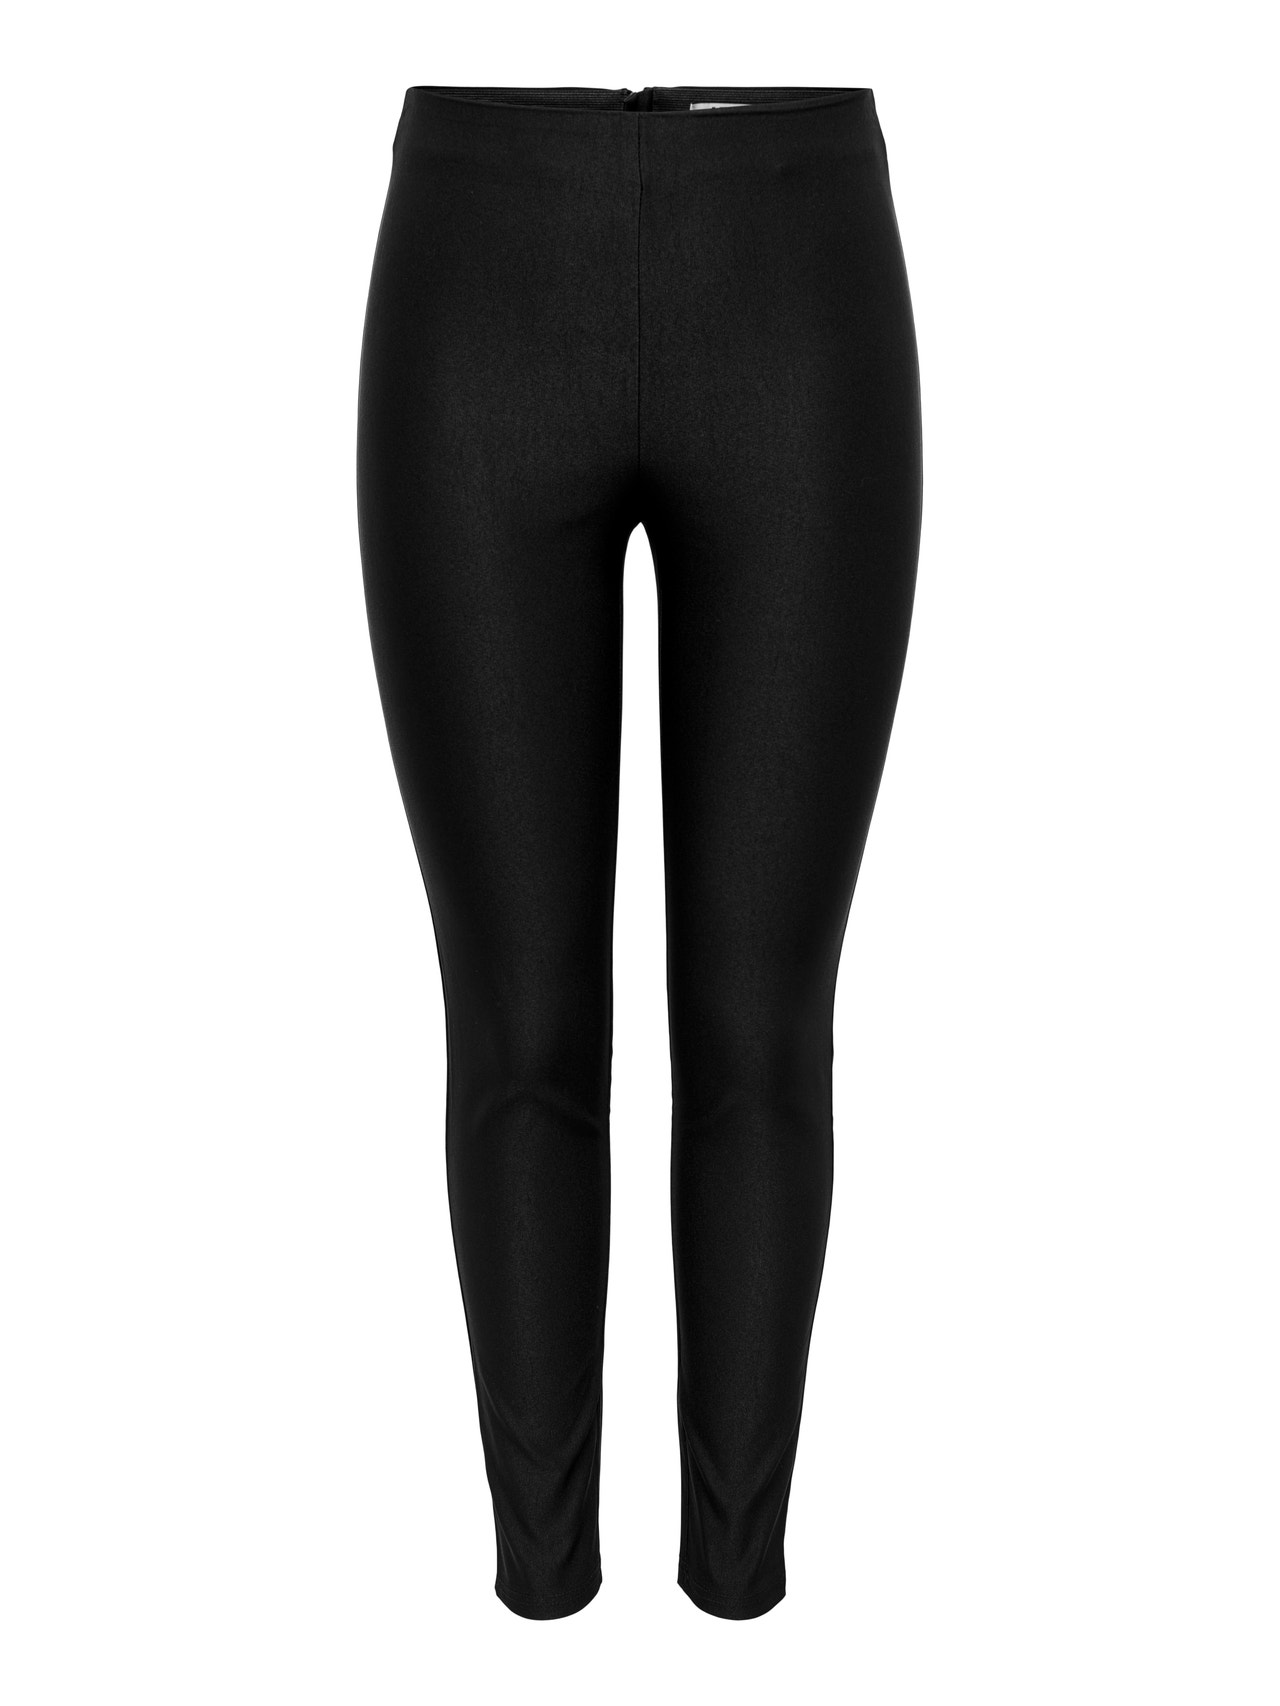 ONLY High waist Trousers -Black - 15275410